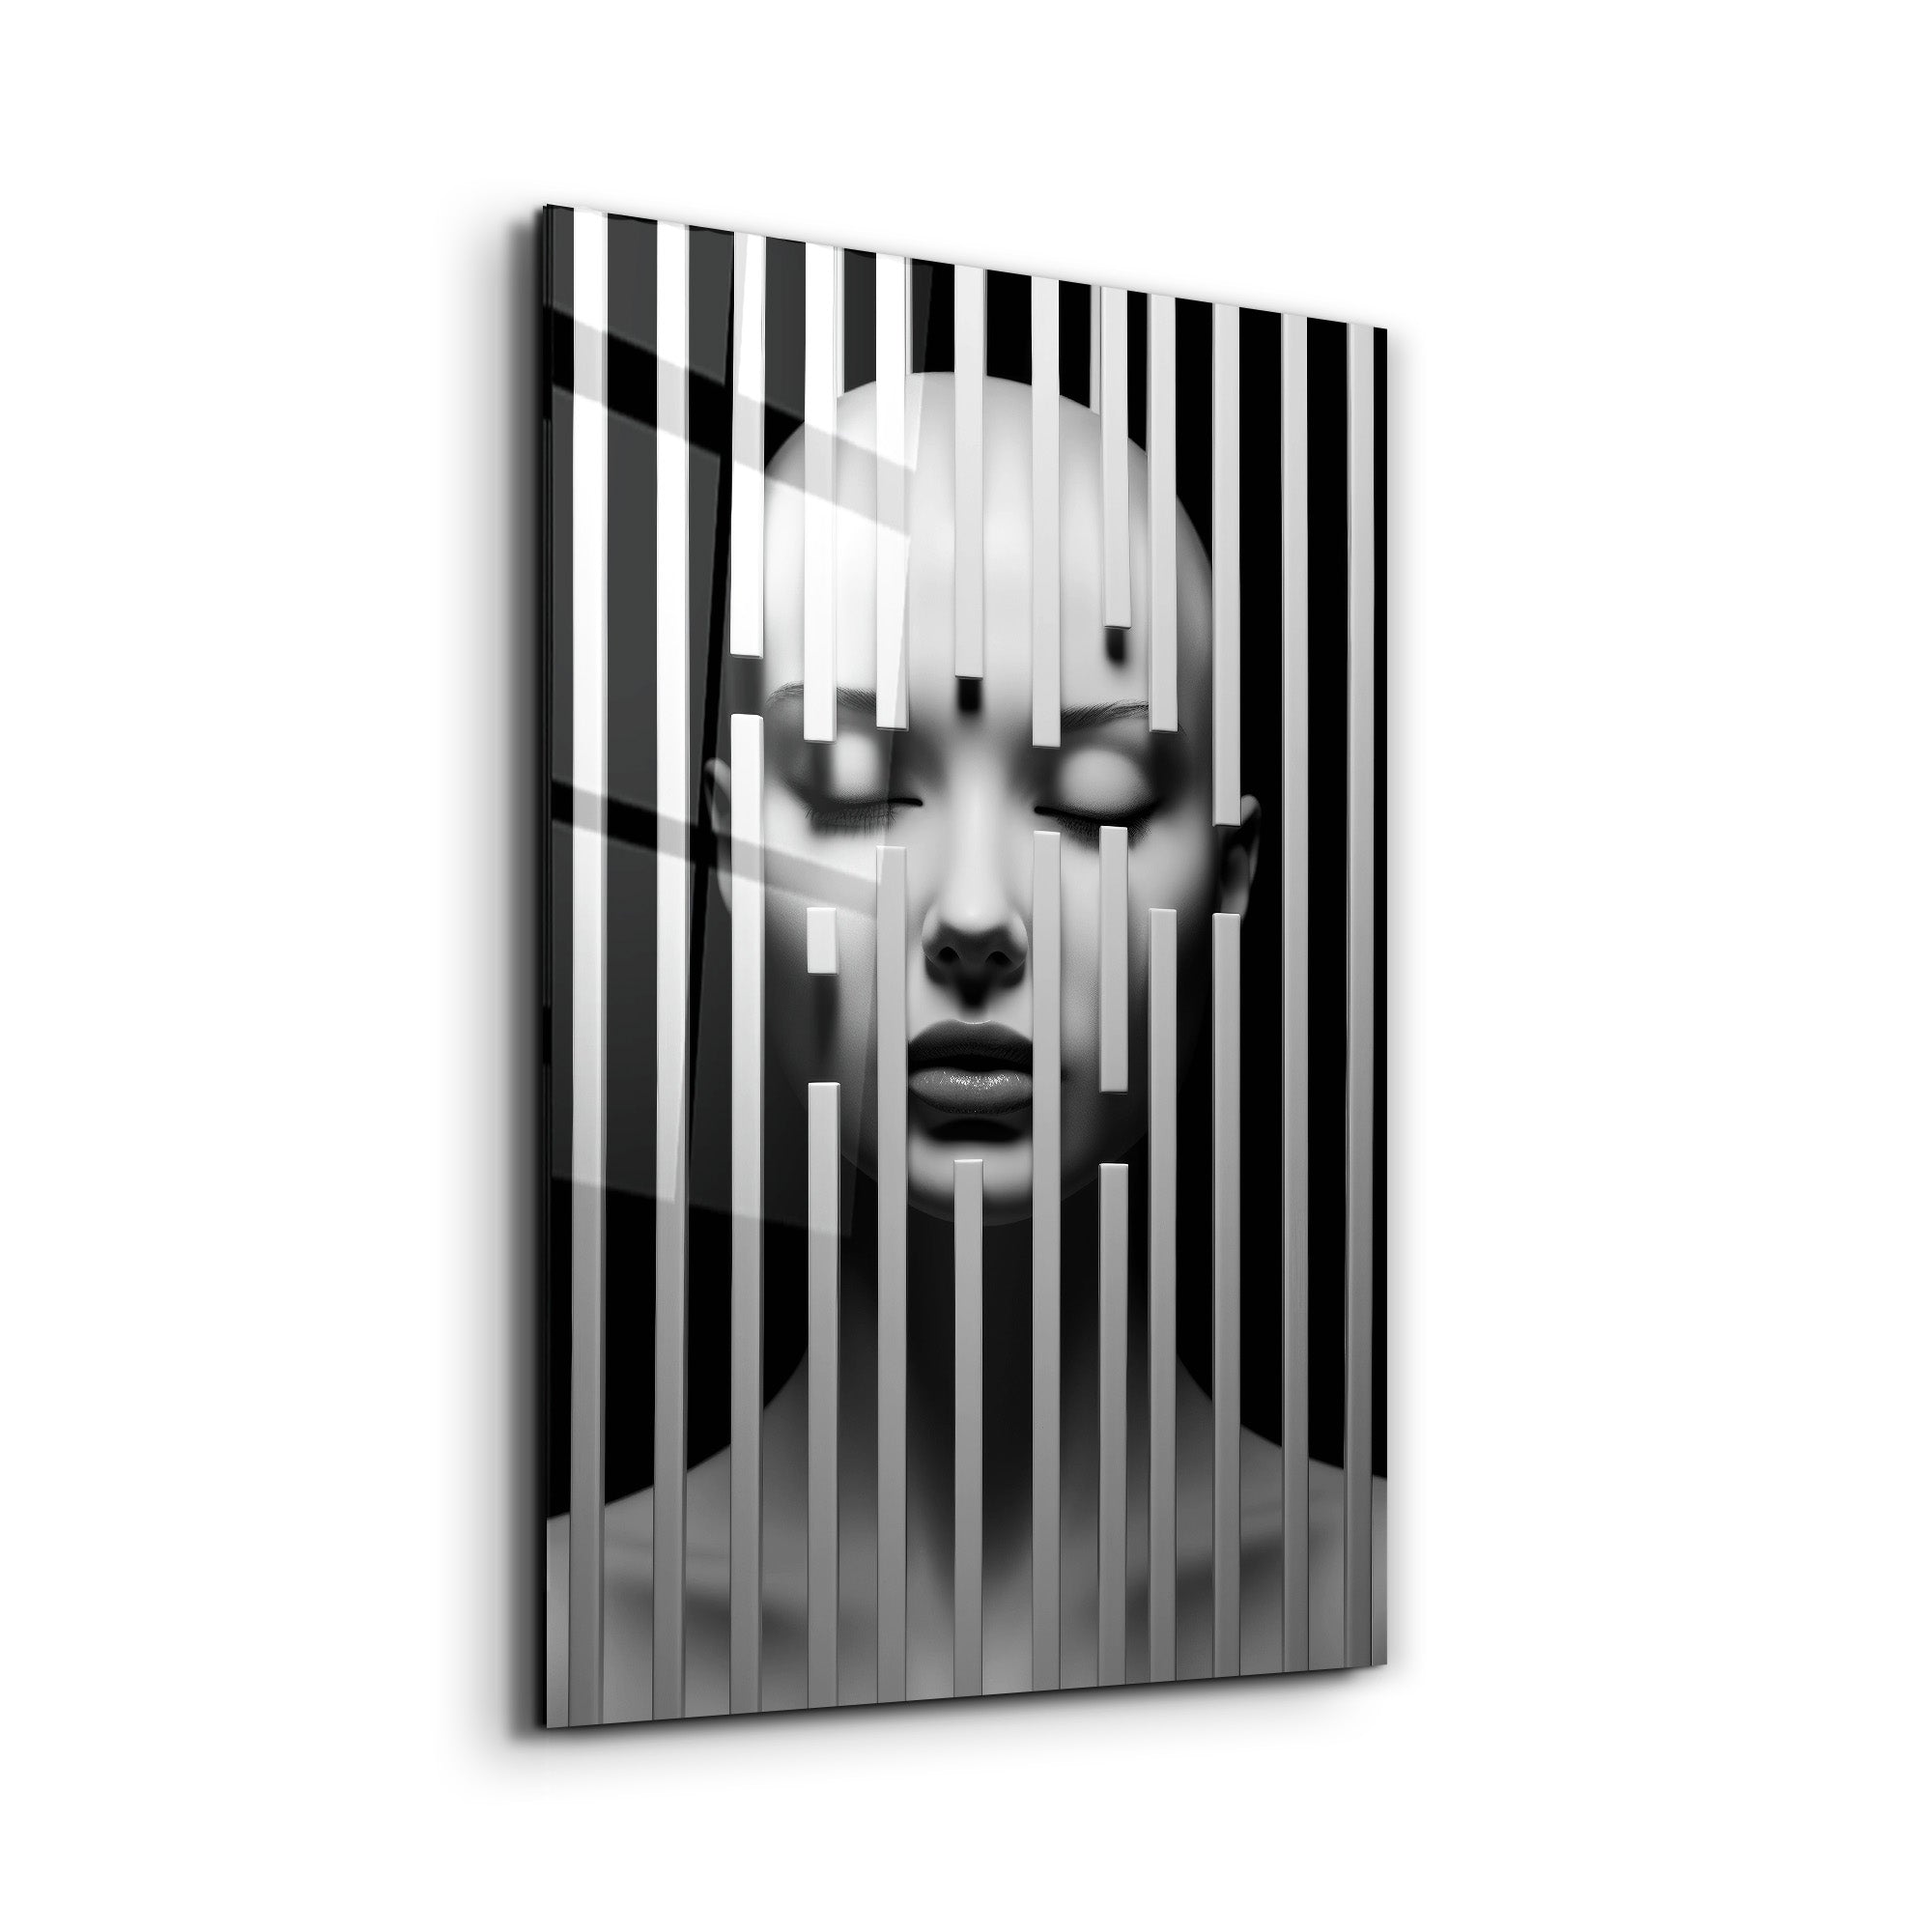 ・"Behind the Bars 2"・Designers Collection Glass Wall Art